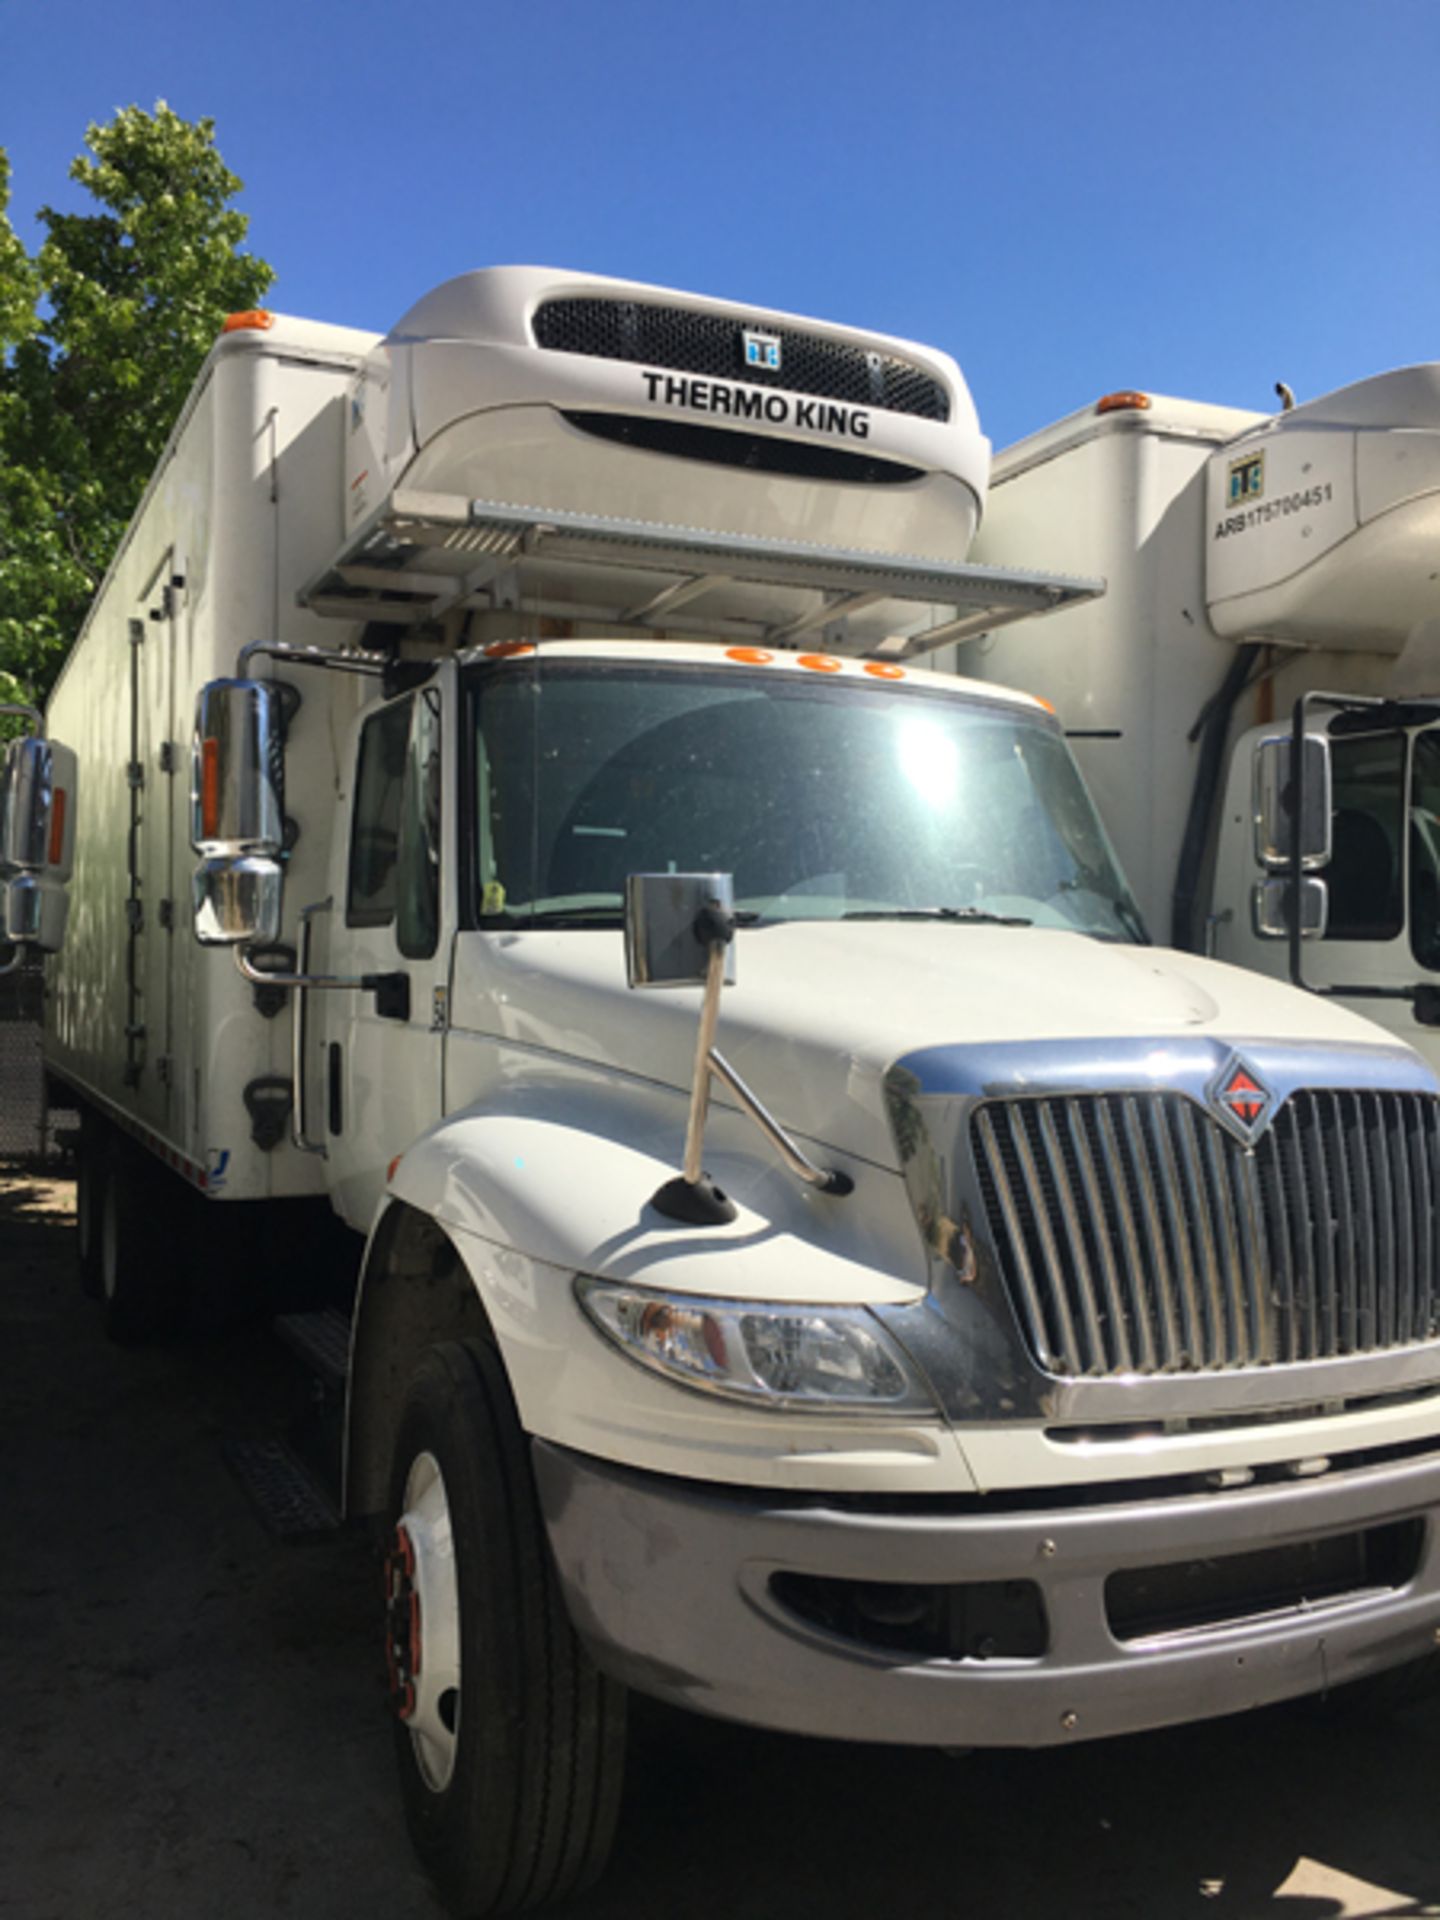 2018 INTERNATIONAL 4400 SBA 6X4 REFRIGERATED BOX TRUCK VIN#: 1HTMSTAR1JH529960, Approx Miles: 53120, - Image 2 of 8